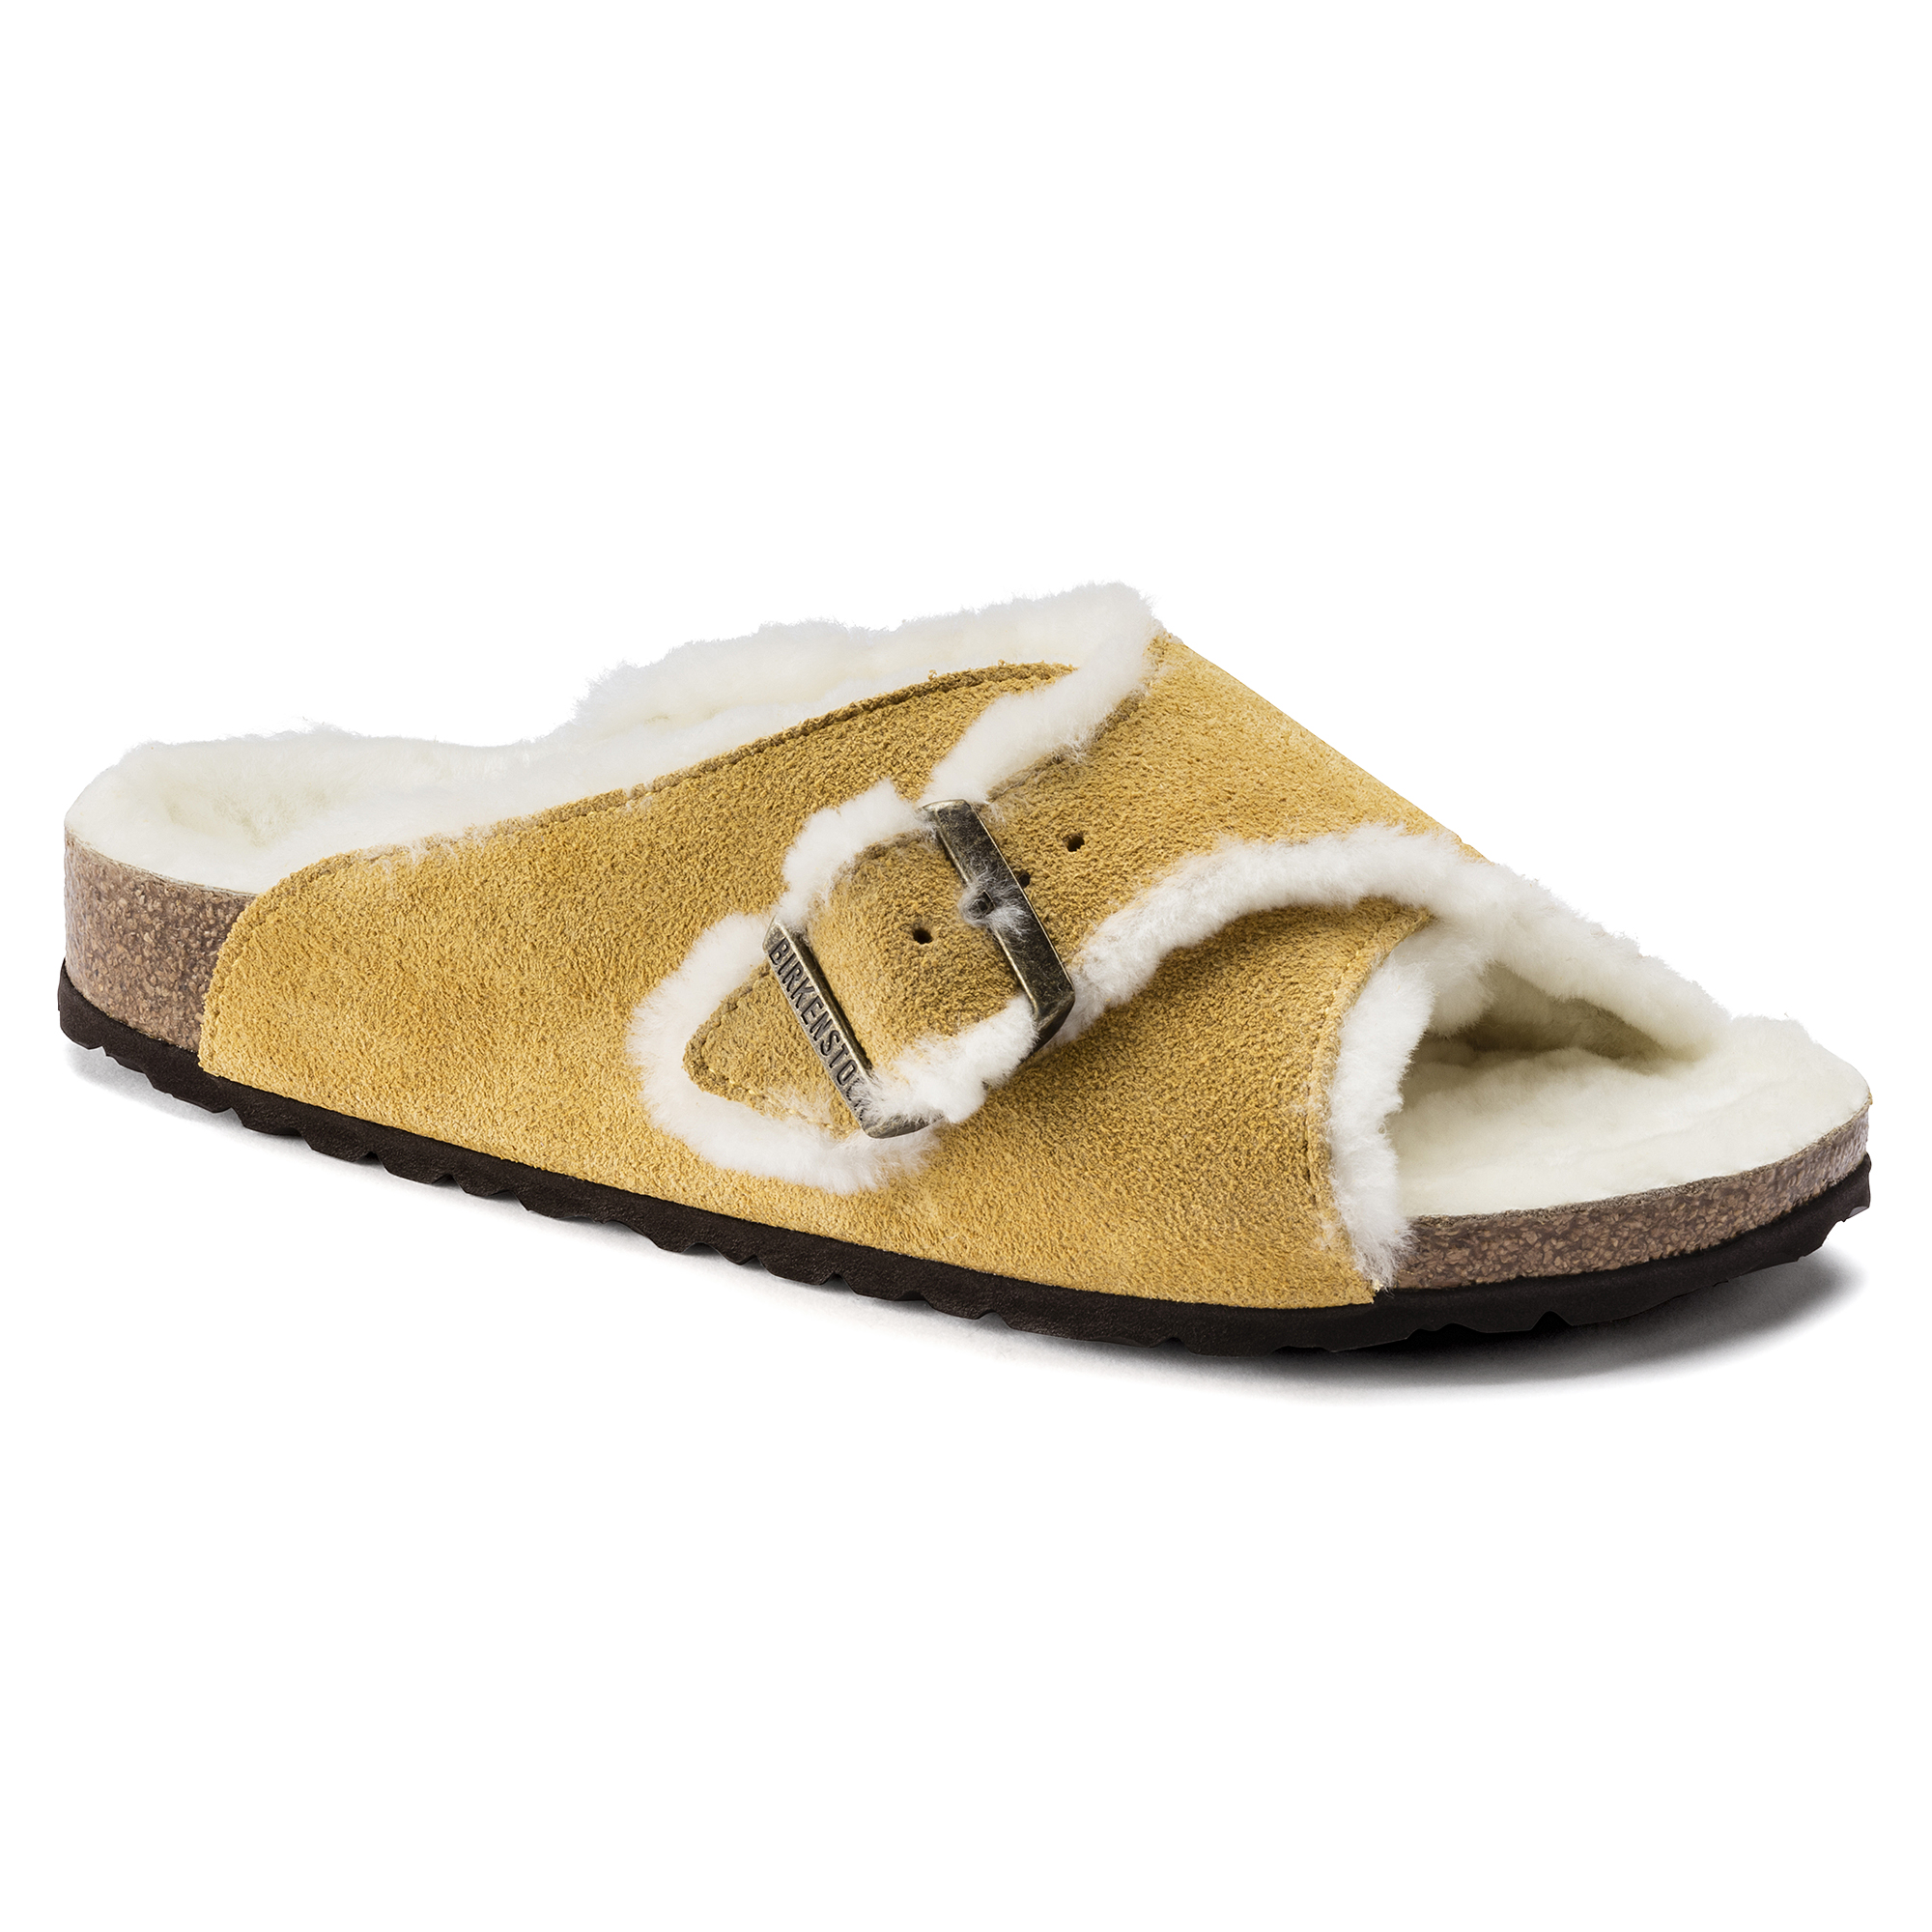 Arosa Shearling Suede Leather Ochre 